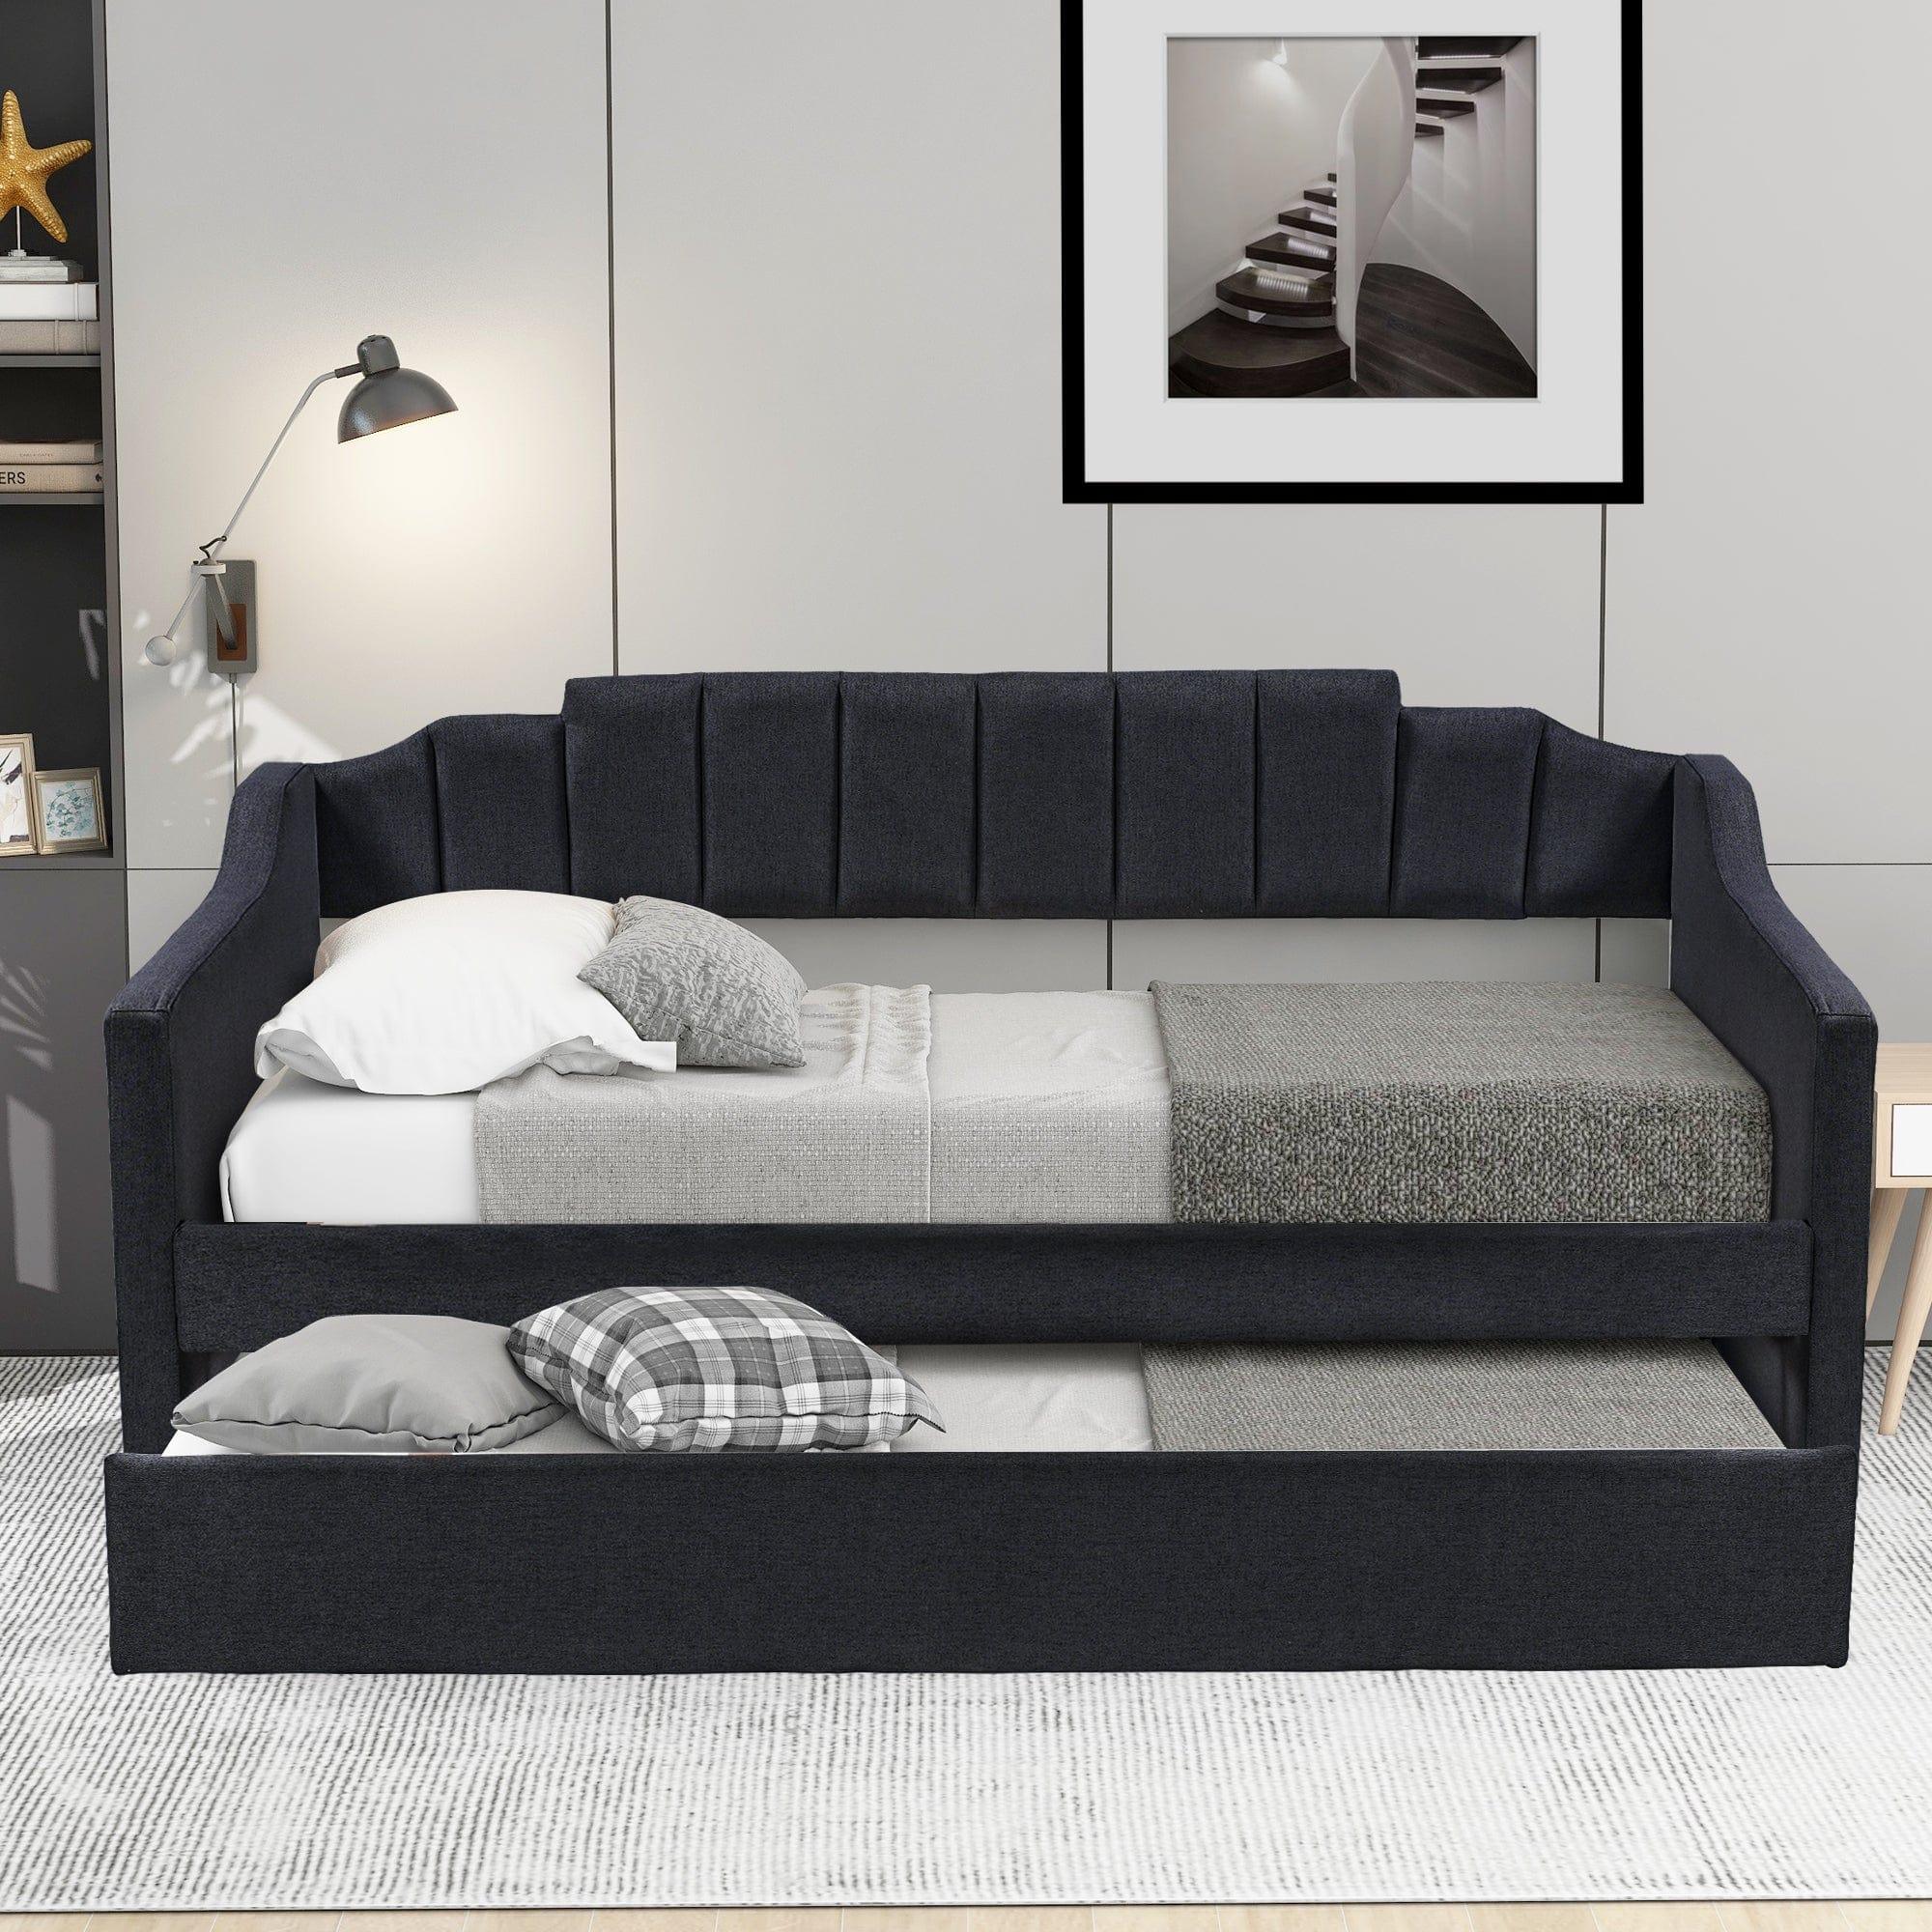 Shop Upholstered Twin Daybed with Trundle,Black Mademoiselle Home Decor